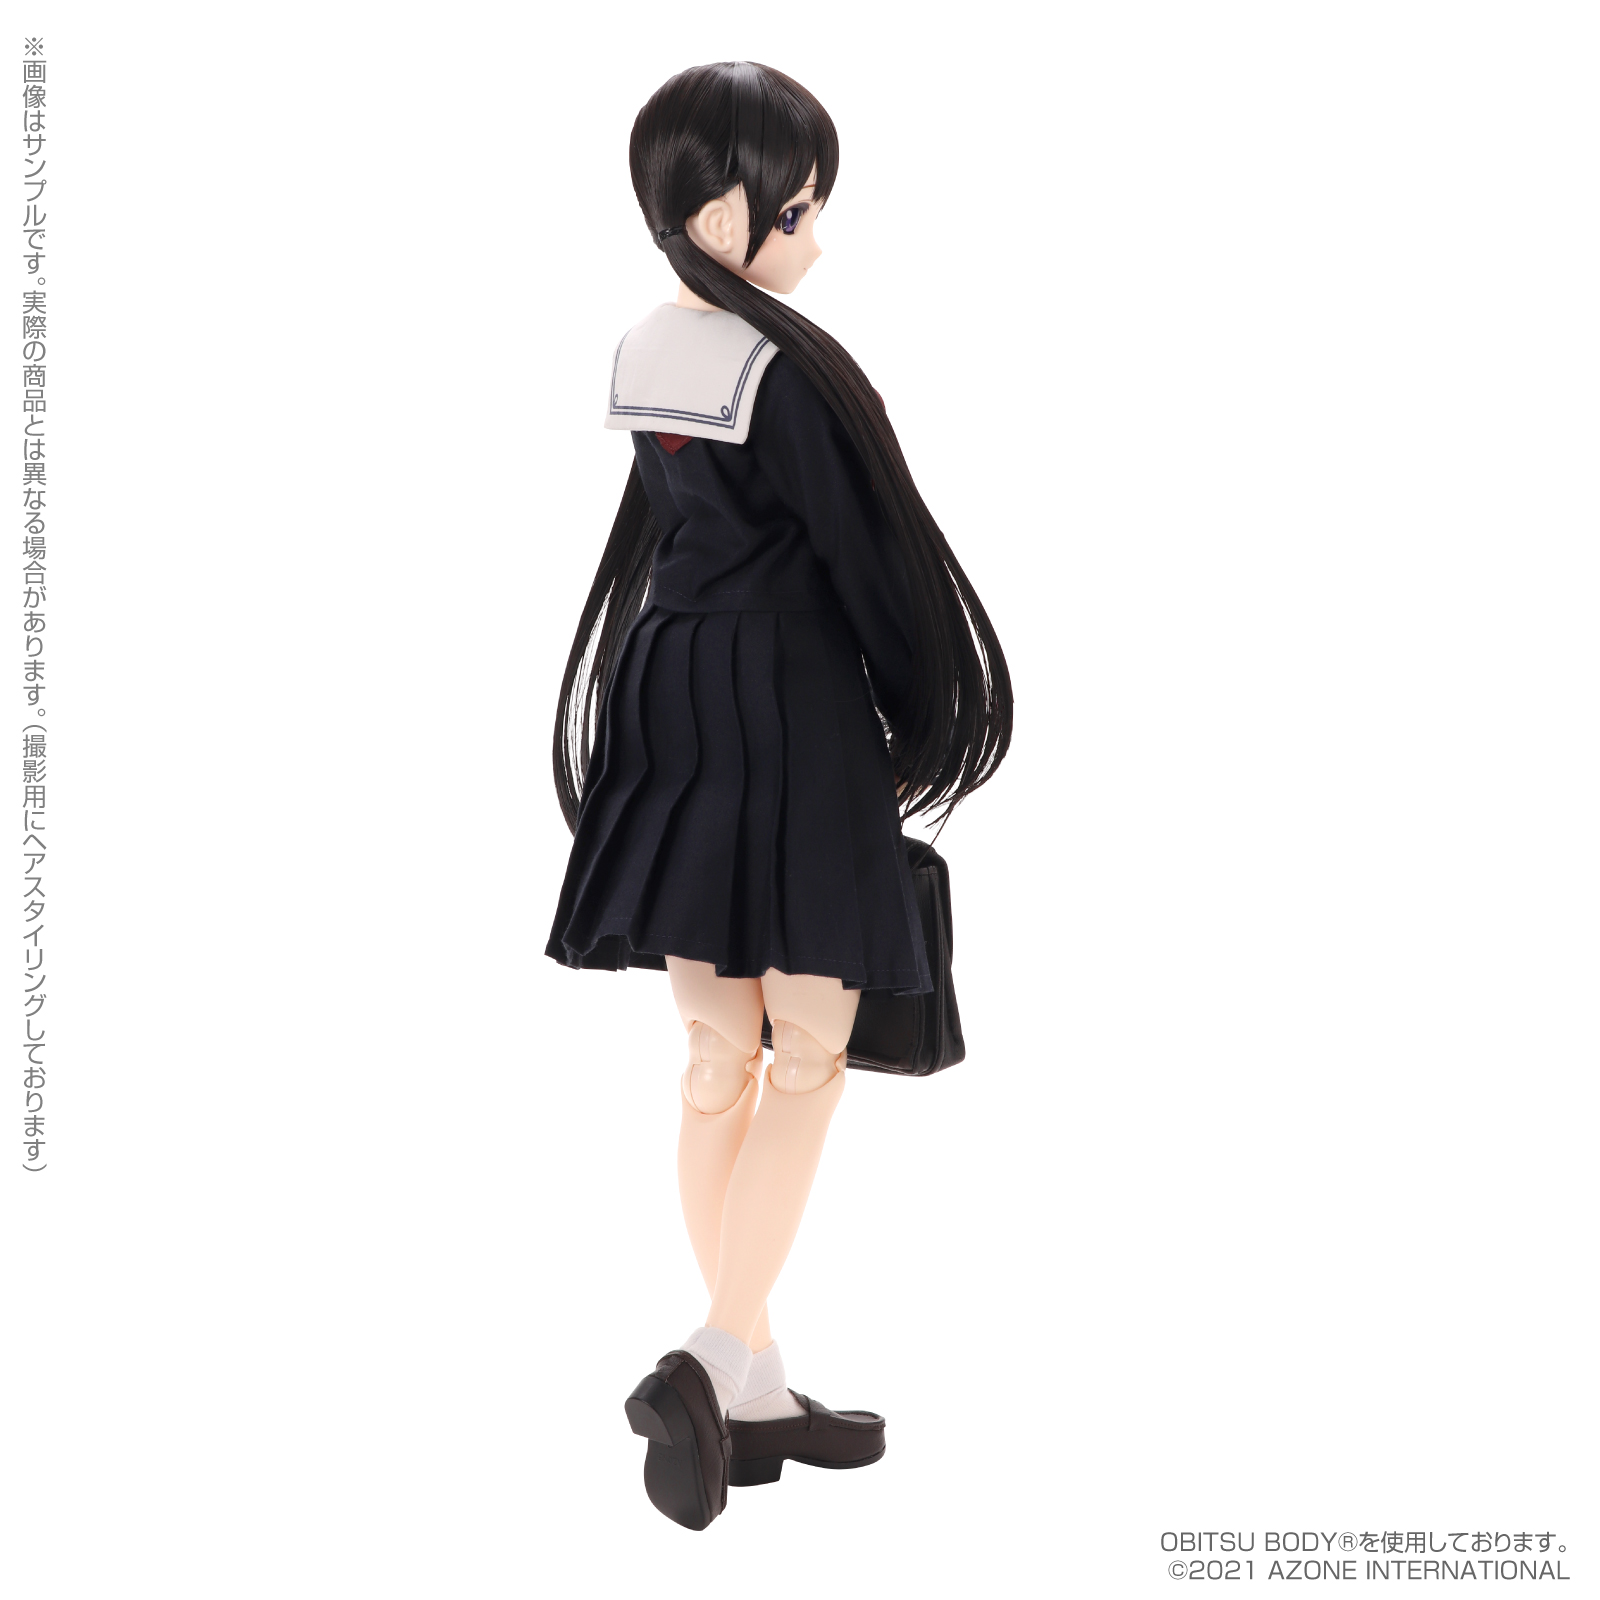 Happiness Clover 和遥キナ学校制服コレクション『和遥清心女子学園ver./まひろ』ハピネスクローバー 1/3 完成品ドール-005